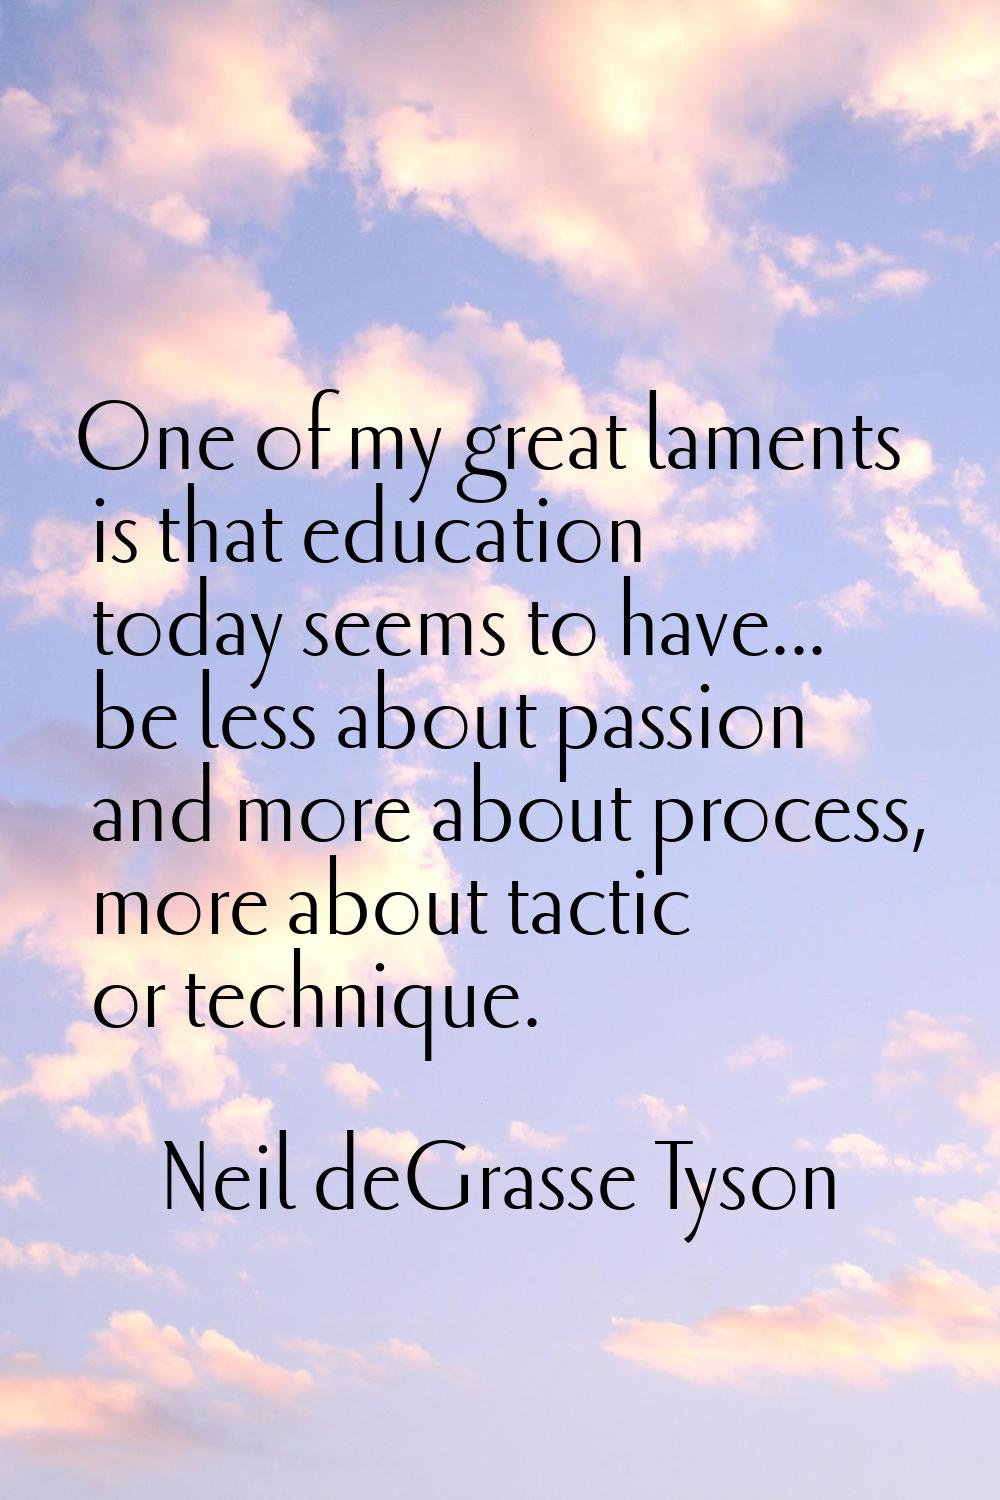 One of my great laments is that education today seems to have... be less about passion and more abo